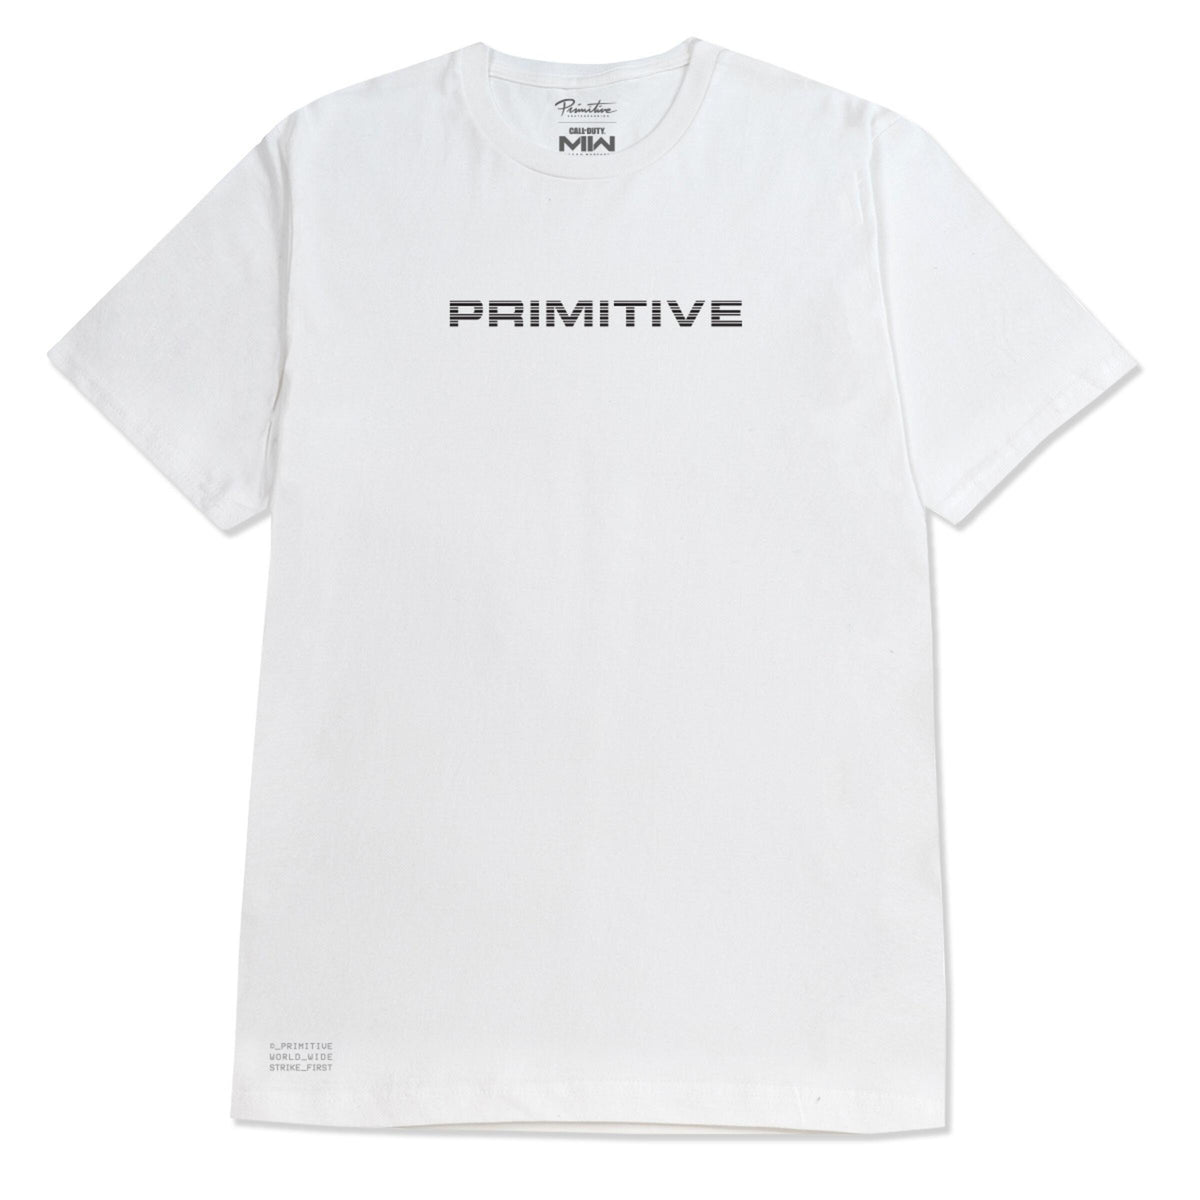 Primitive x Call of Duty Ghost Tee (+3 colors)